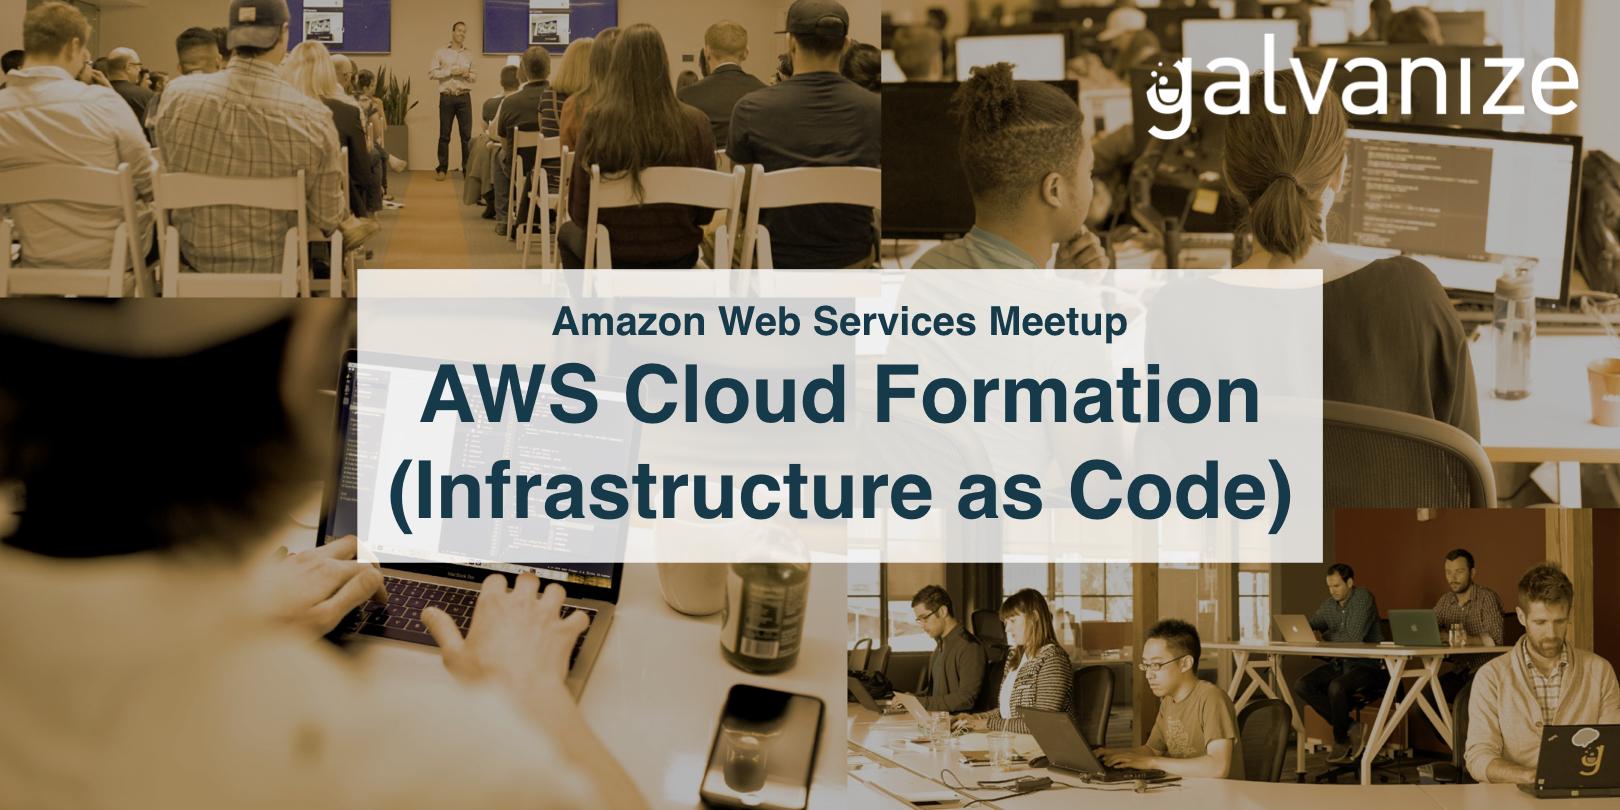 AWS Meetup: Serverless Infrastructure with AWS Lambda - Livestream Available!